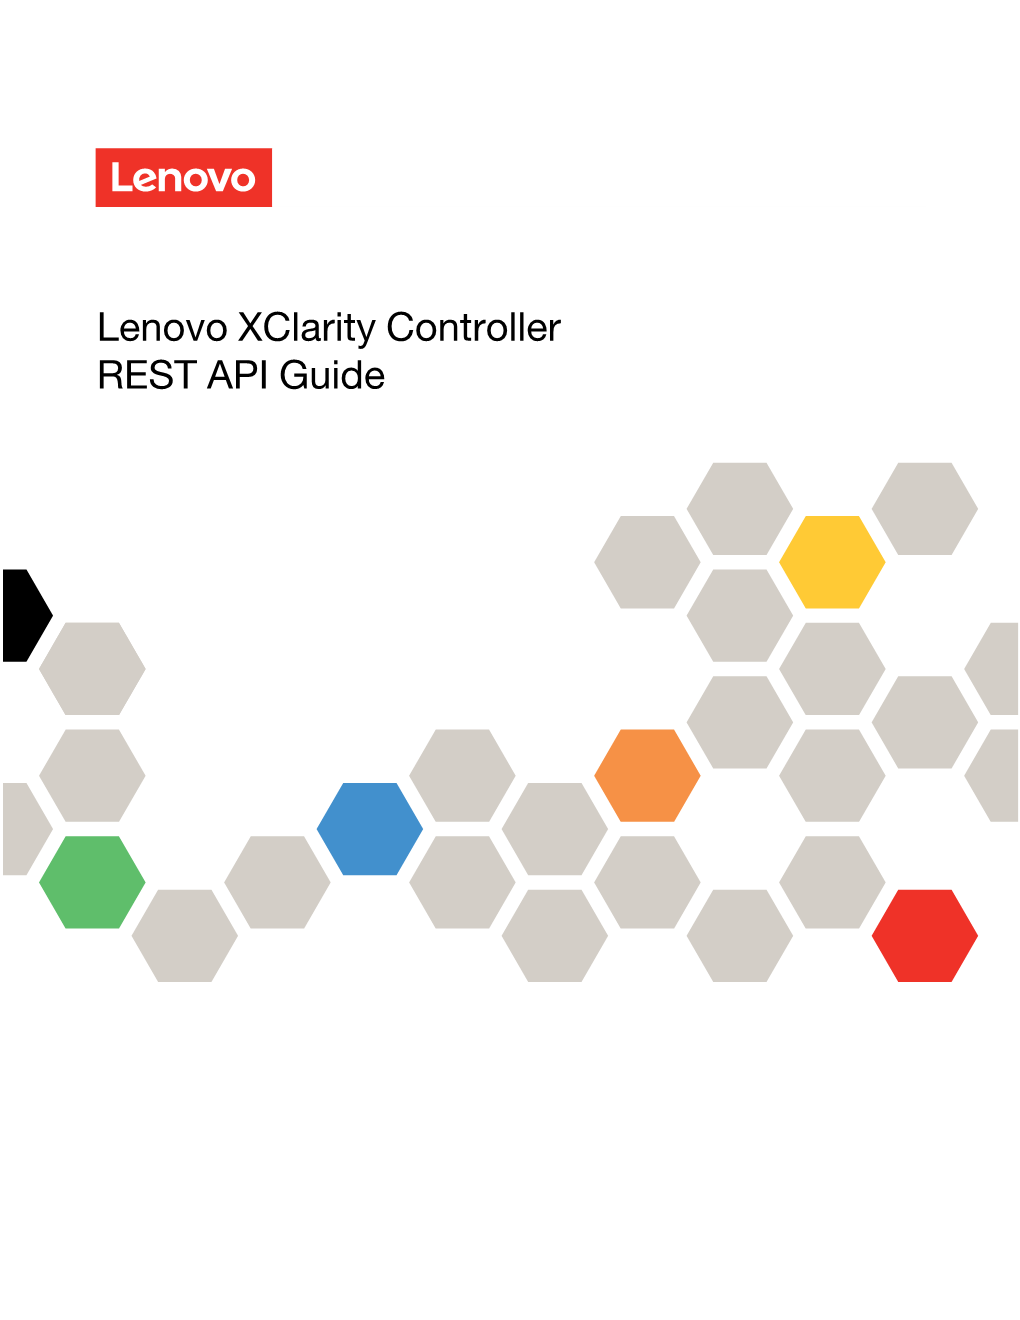 Lenovo Xclarity Controller REST API Guide Note: Before Using This Information, Read the General Information in “Notices” on Page Cclxxvii